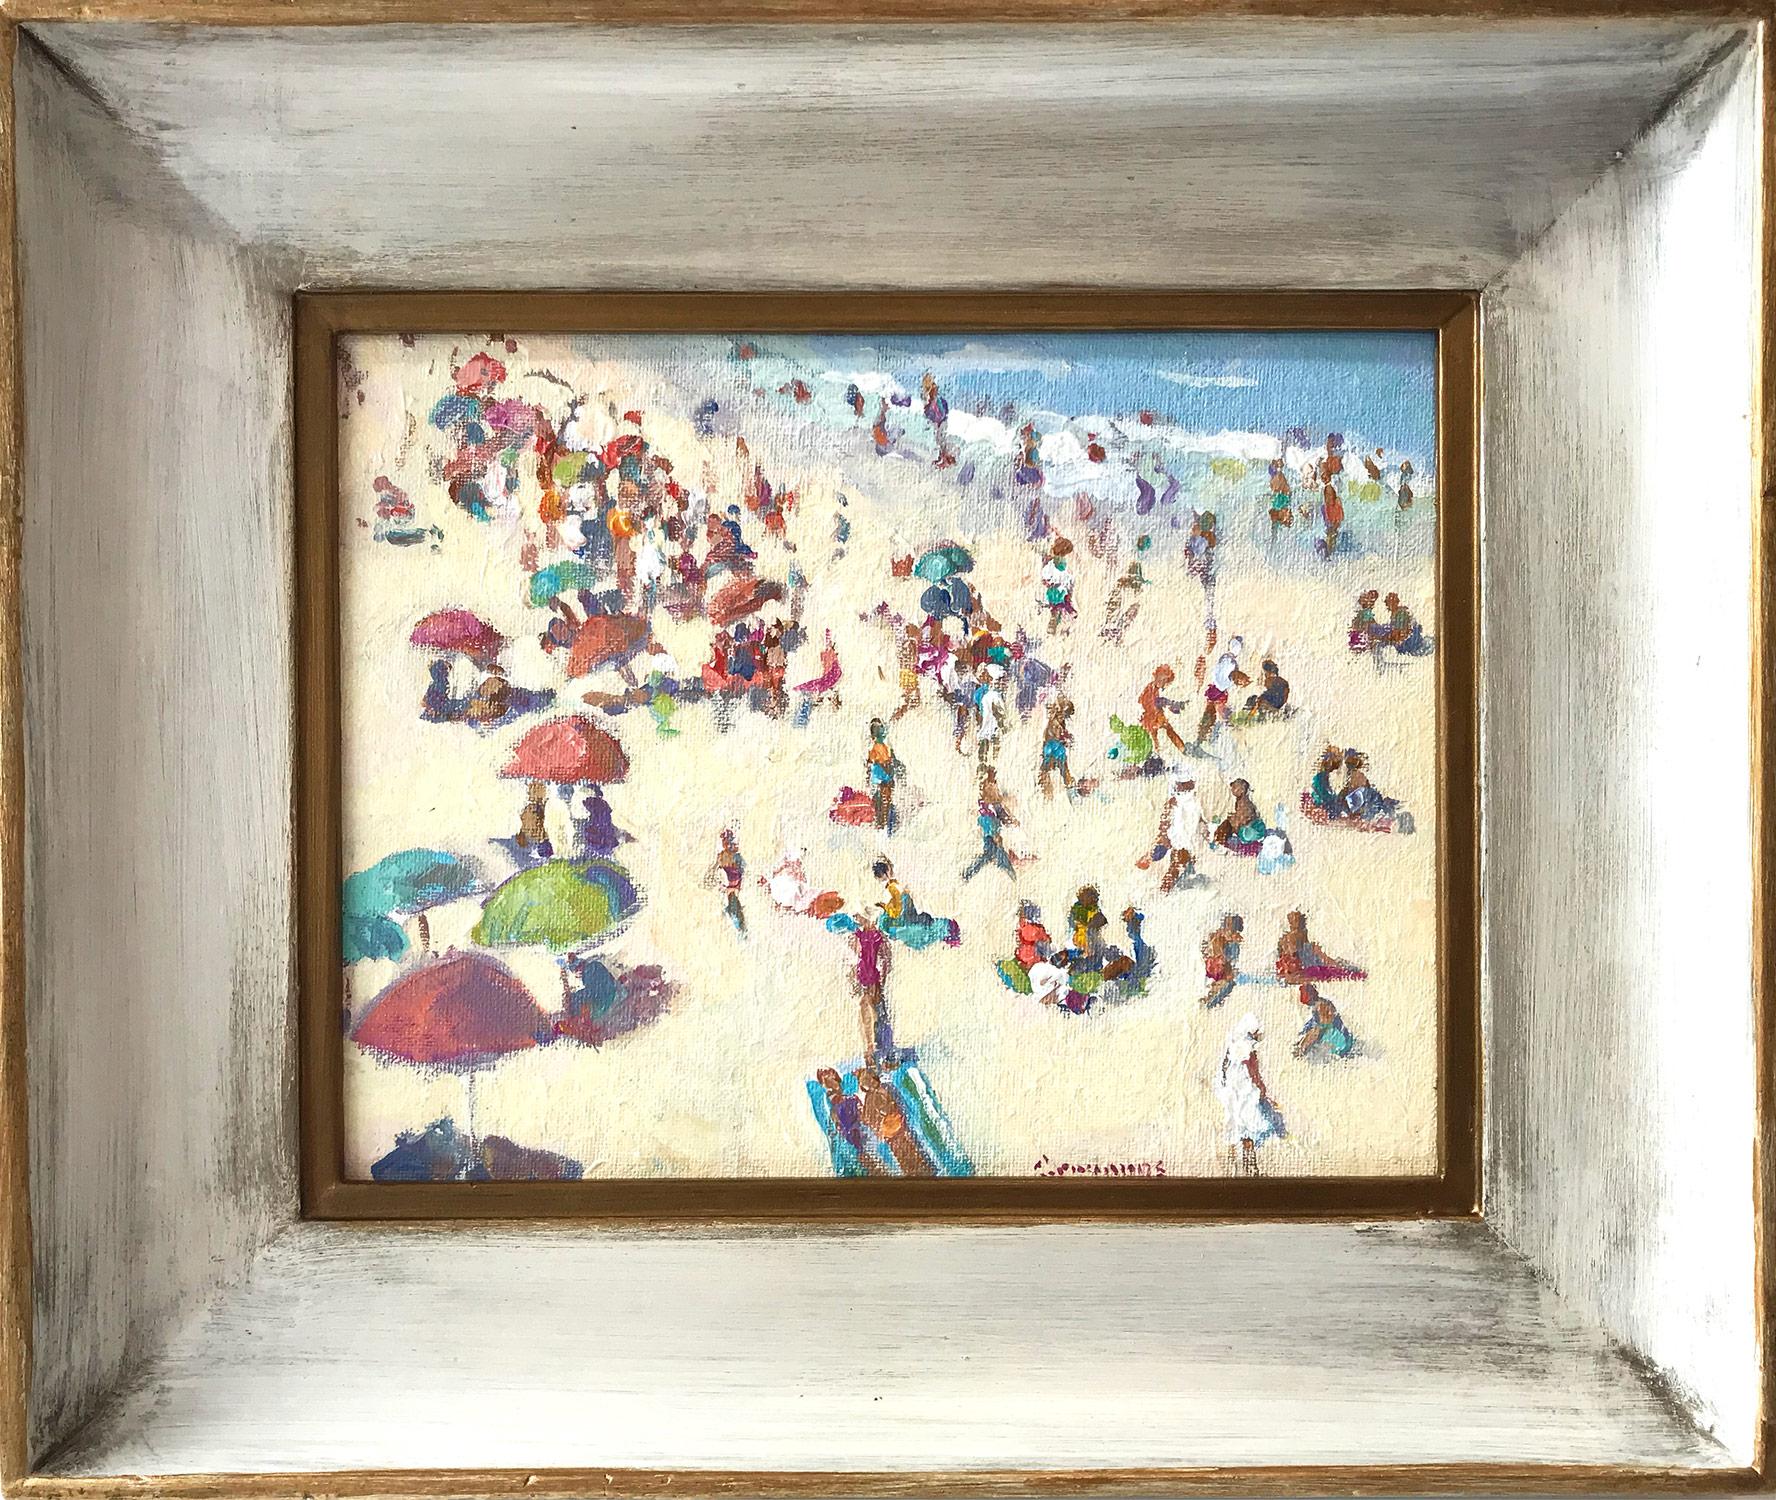 John Crimmins Figurative Painting - "Aerial View of a Day at the Beach" Colorful Post-Impressionist Oil Painting